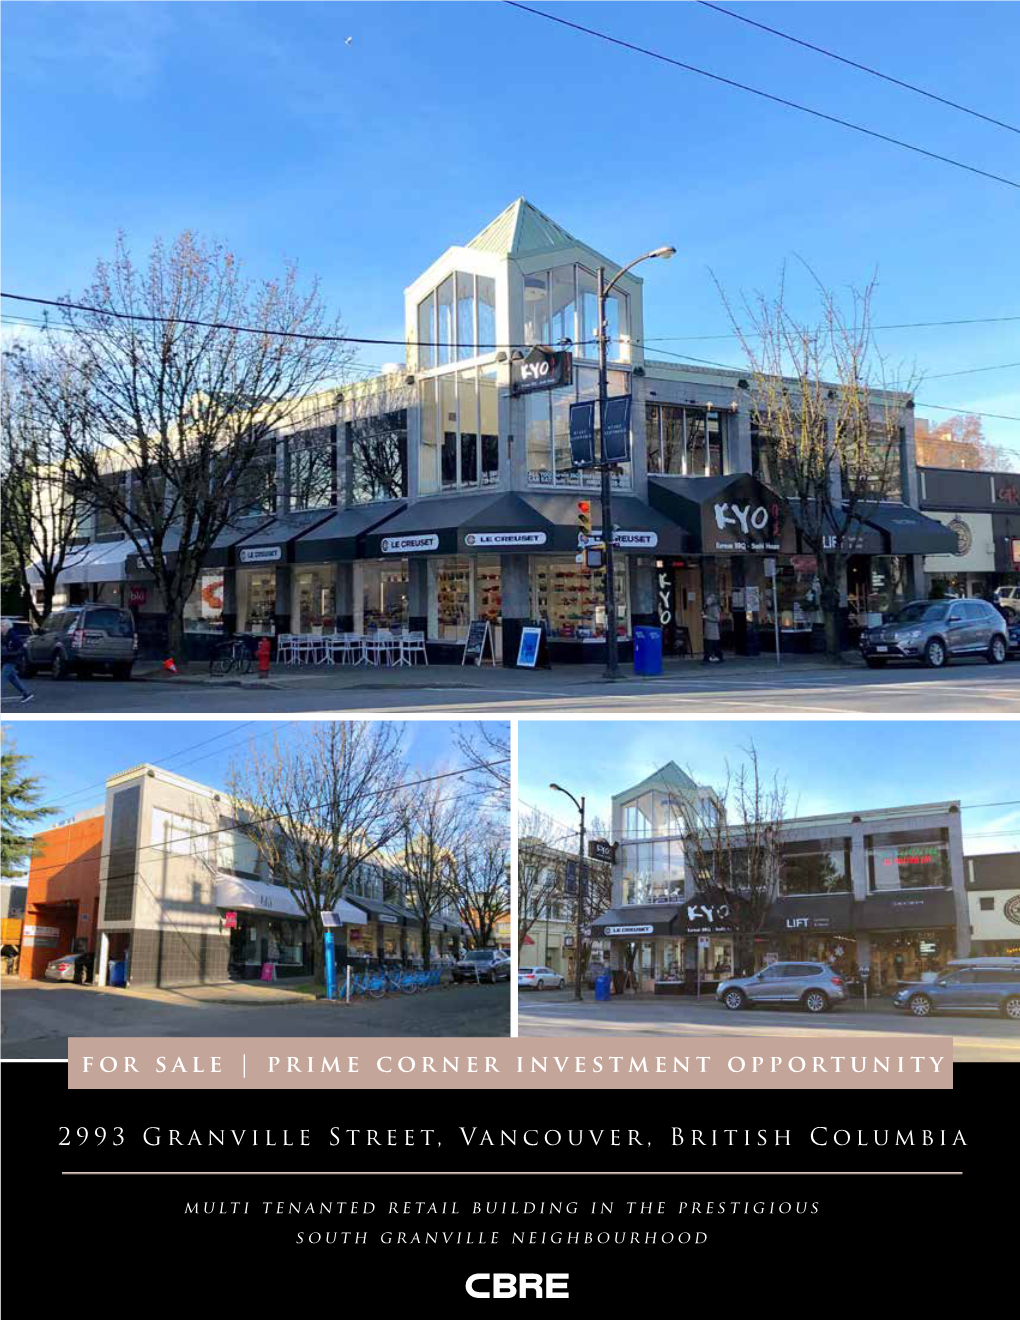 For Sale | Prime Corner Investment Opportunity 2993 Granville Street, Vancouver, British Columbia